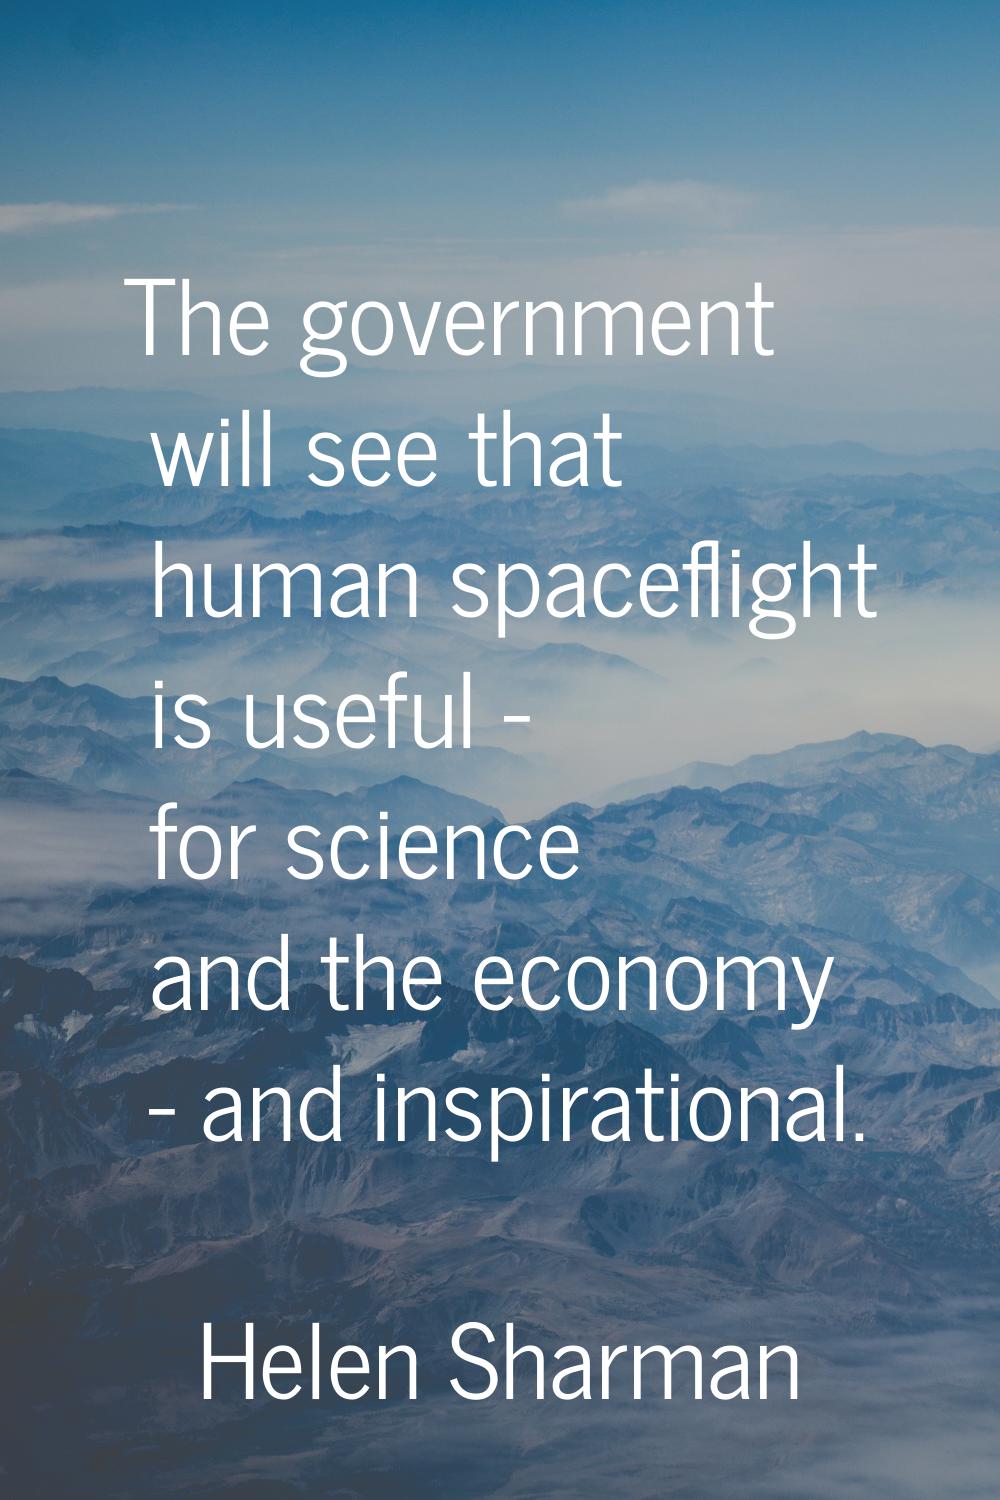 The government will see that human spaceflight is useful - for science and the economy - and inspir